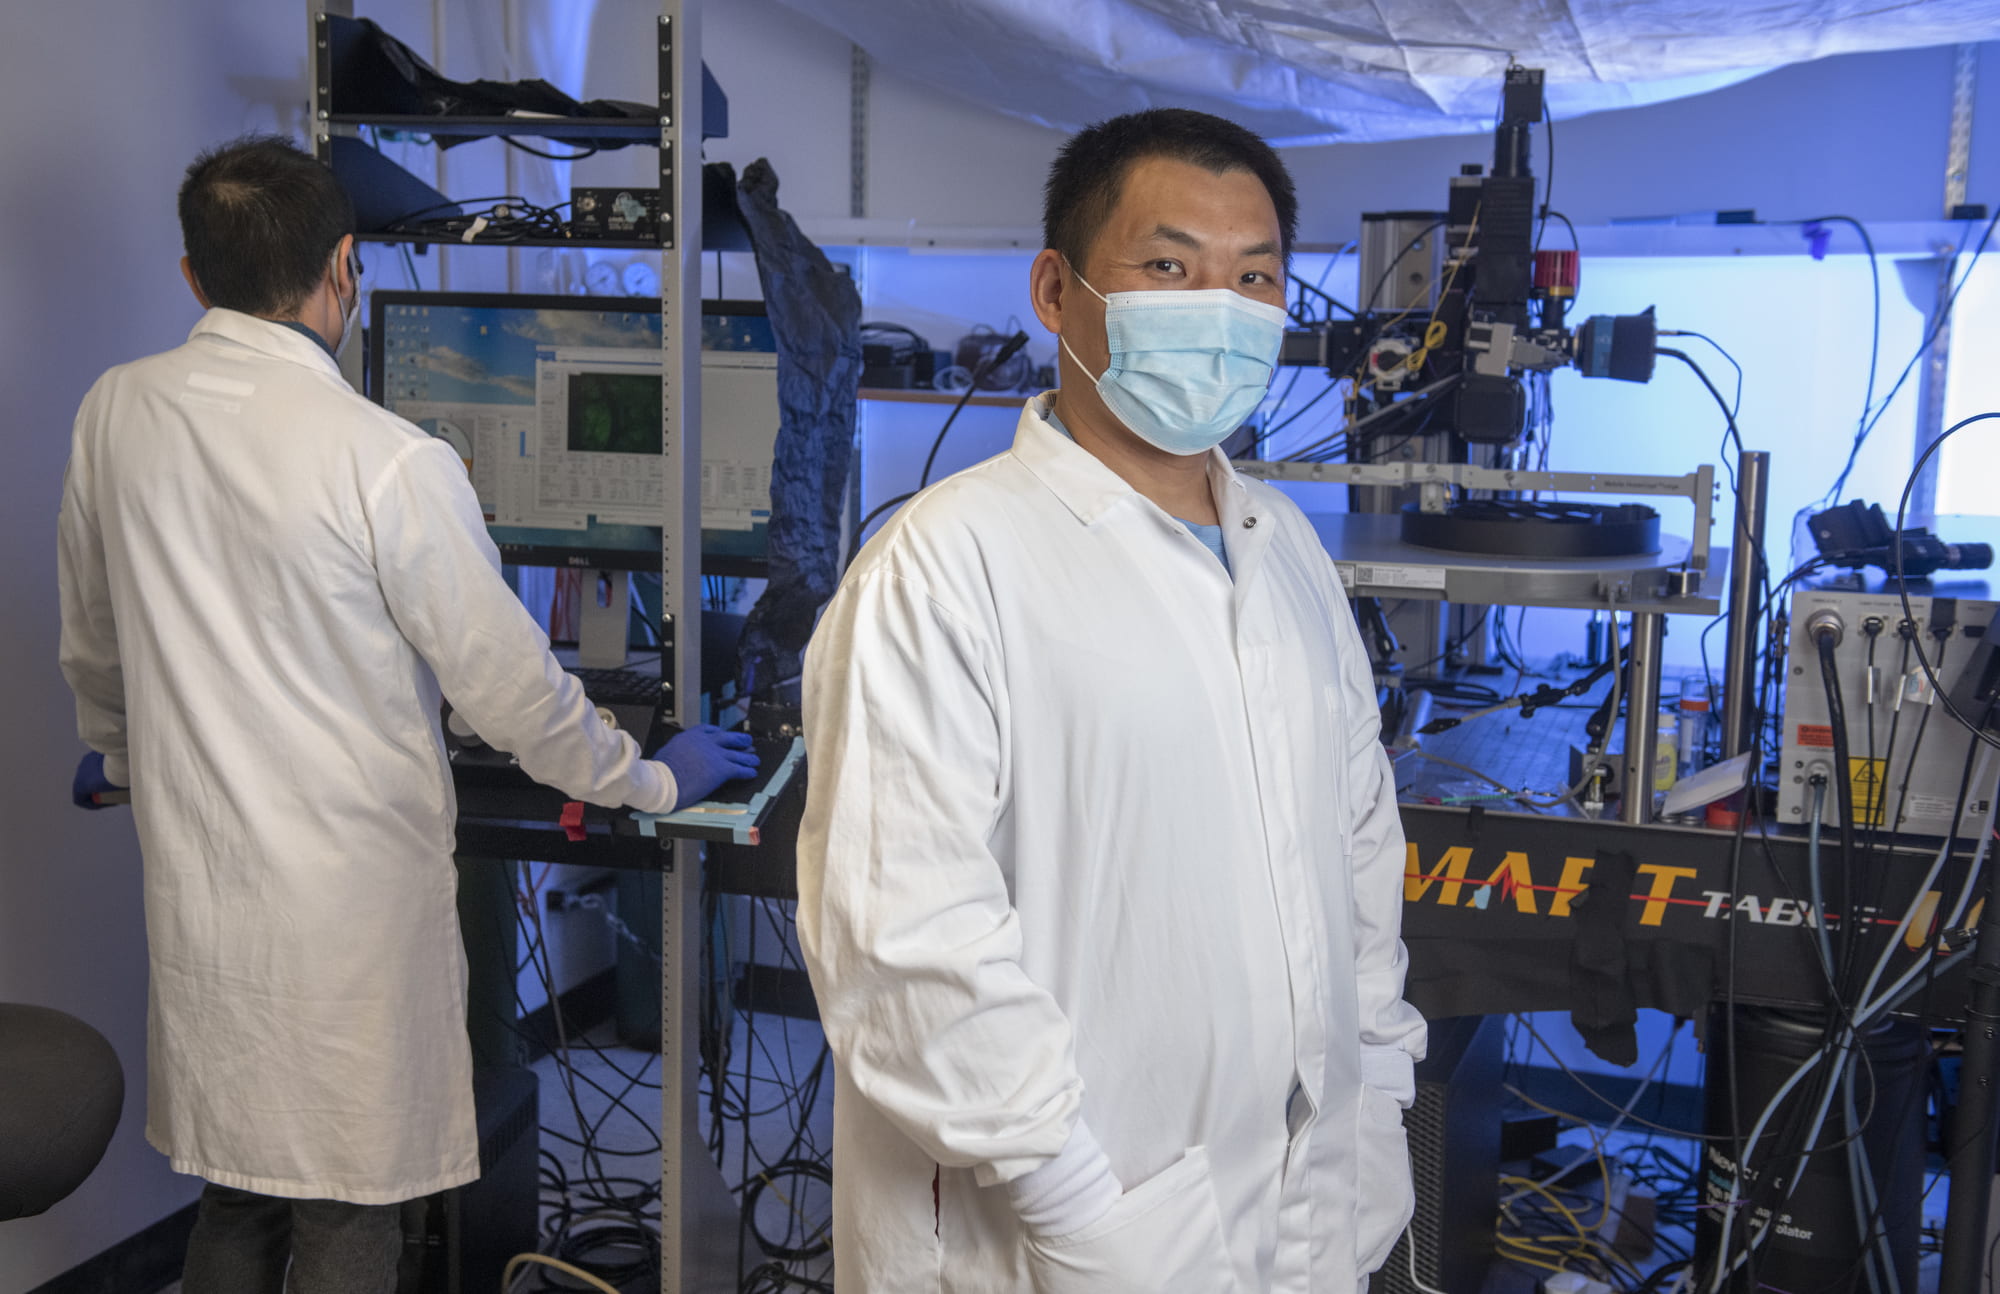 Xiangmin Xu, director of UCI’s Center for Neural Circuit Mapping in his lab